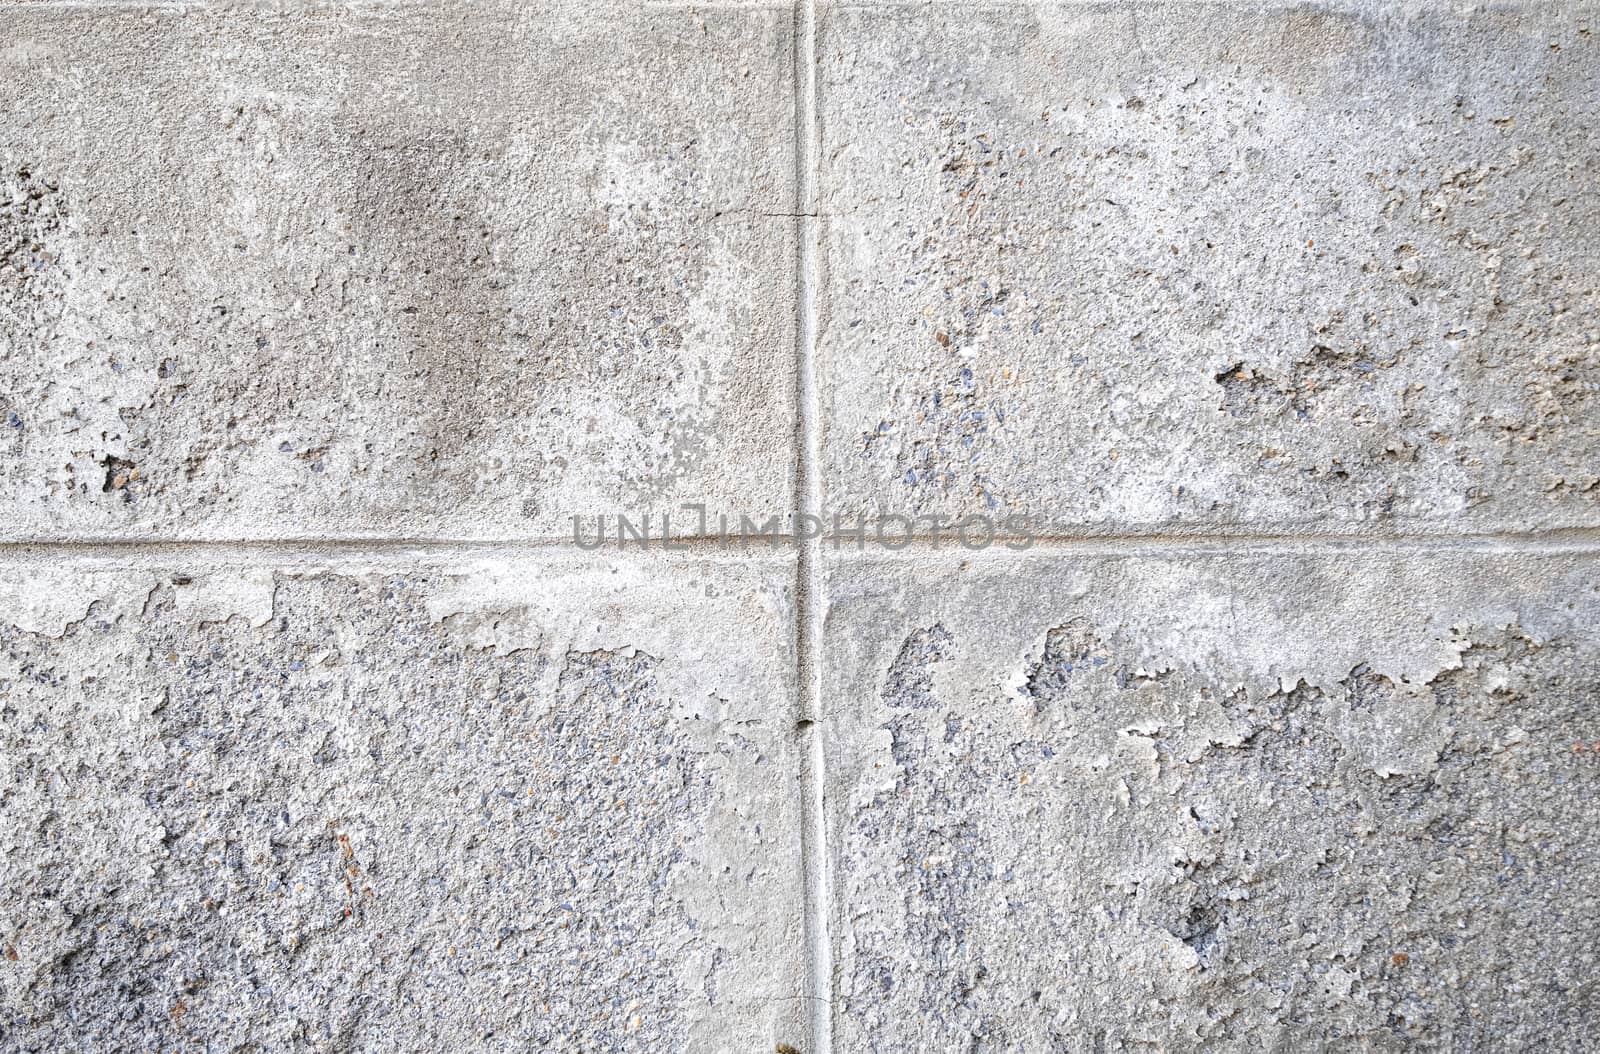 Grunge textured concrete wall by Nawoot